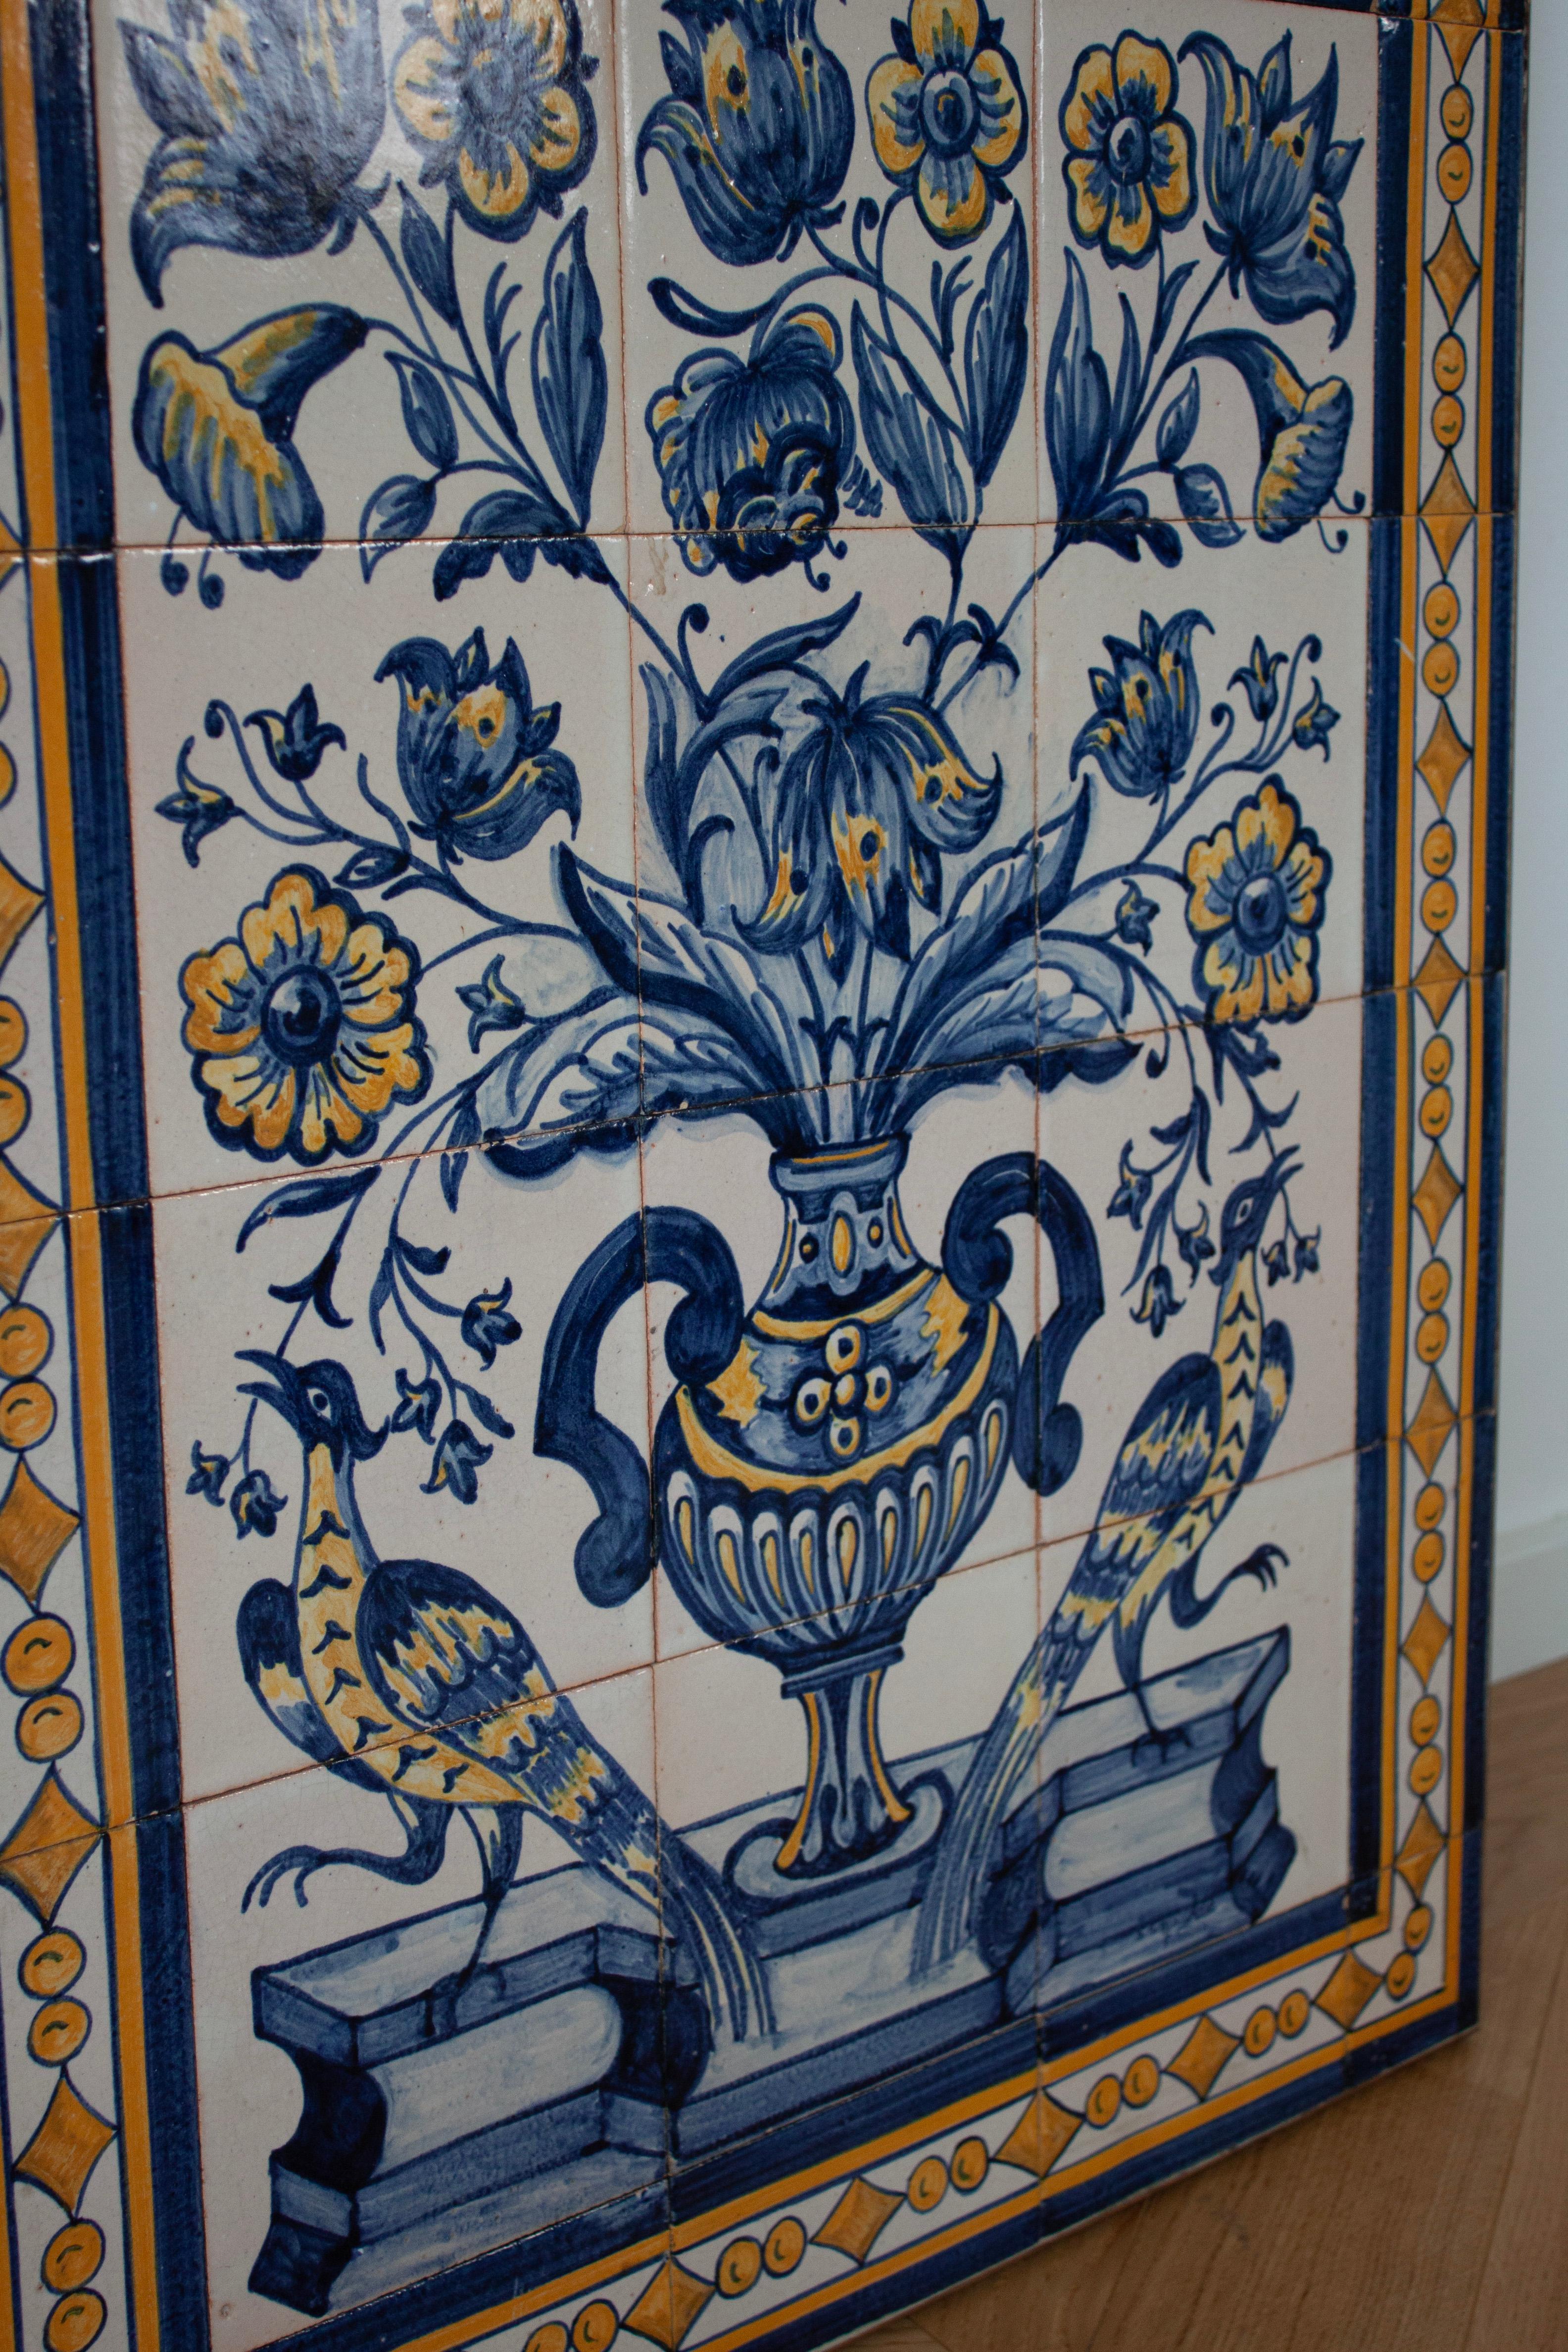 European Floral and Animal Blue and White Tiled Wall Artwork Wall Hanging  For Sale 2